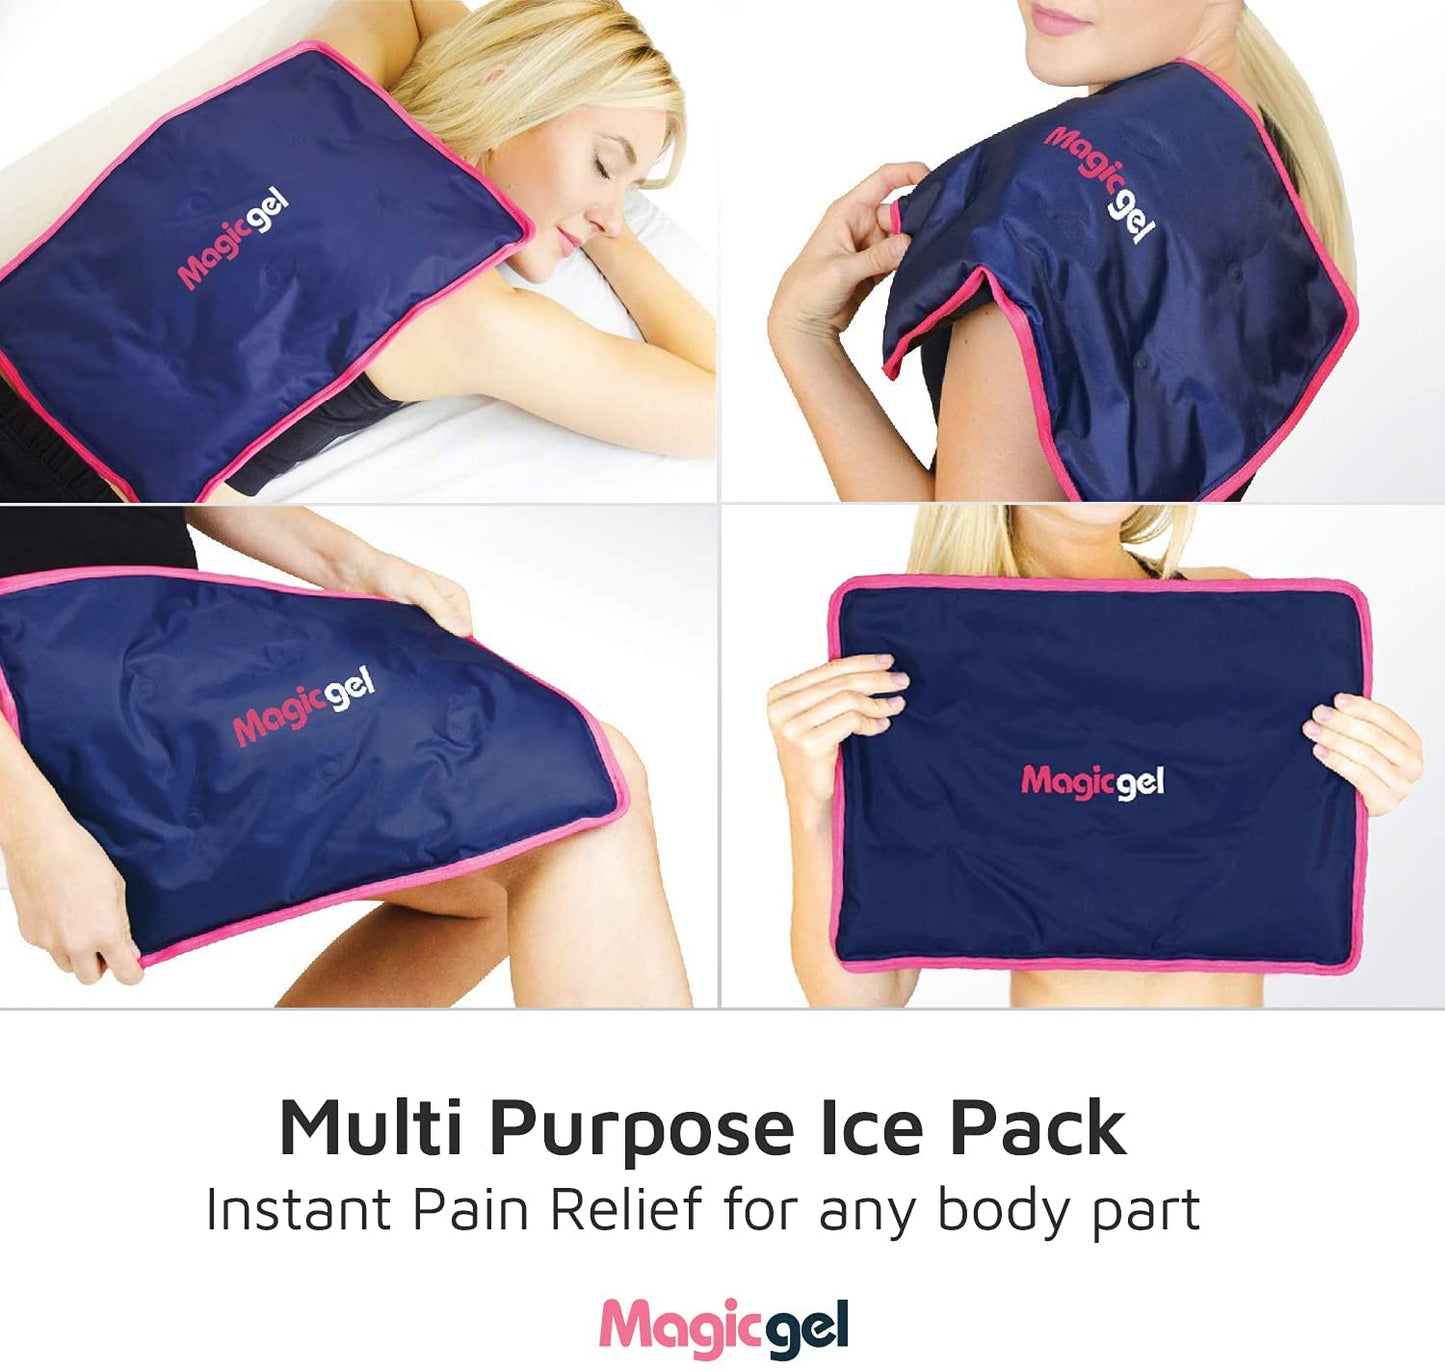 Flexible Ice Pack Pack for injuries and pain relief (L Size)